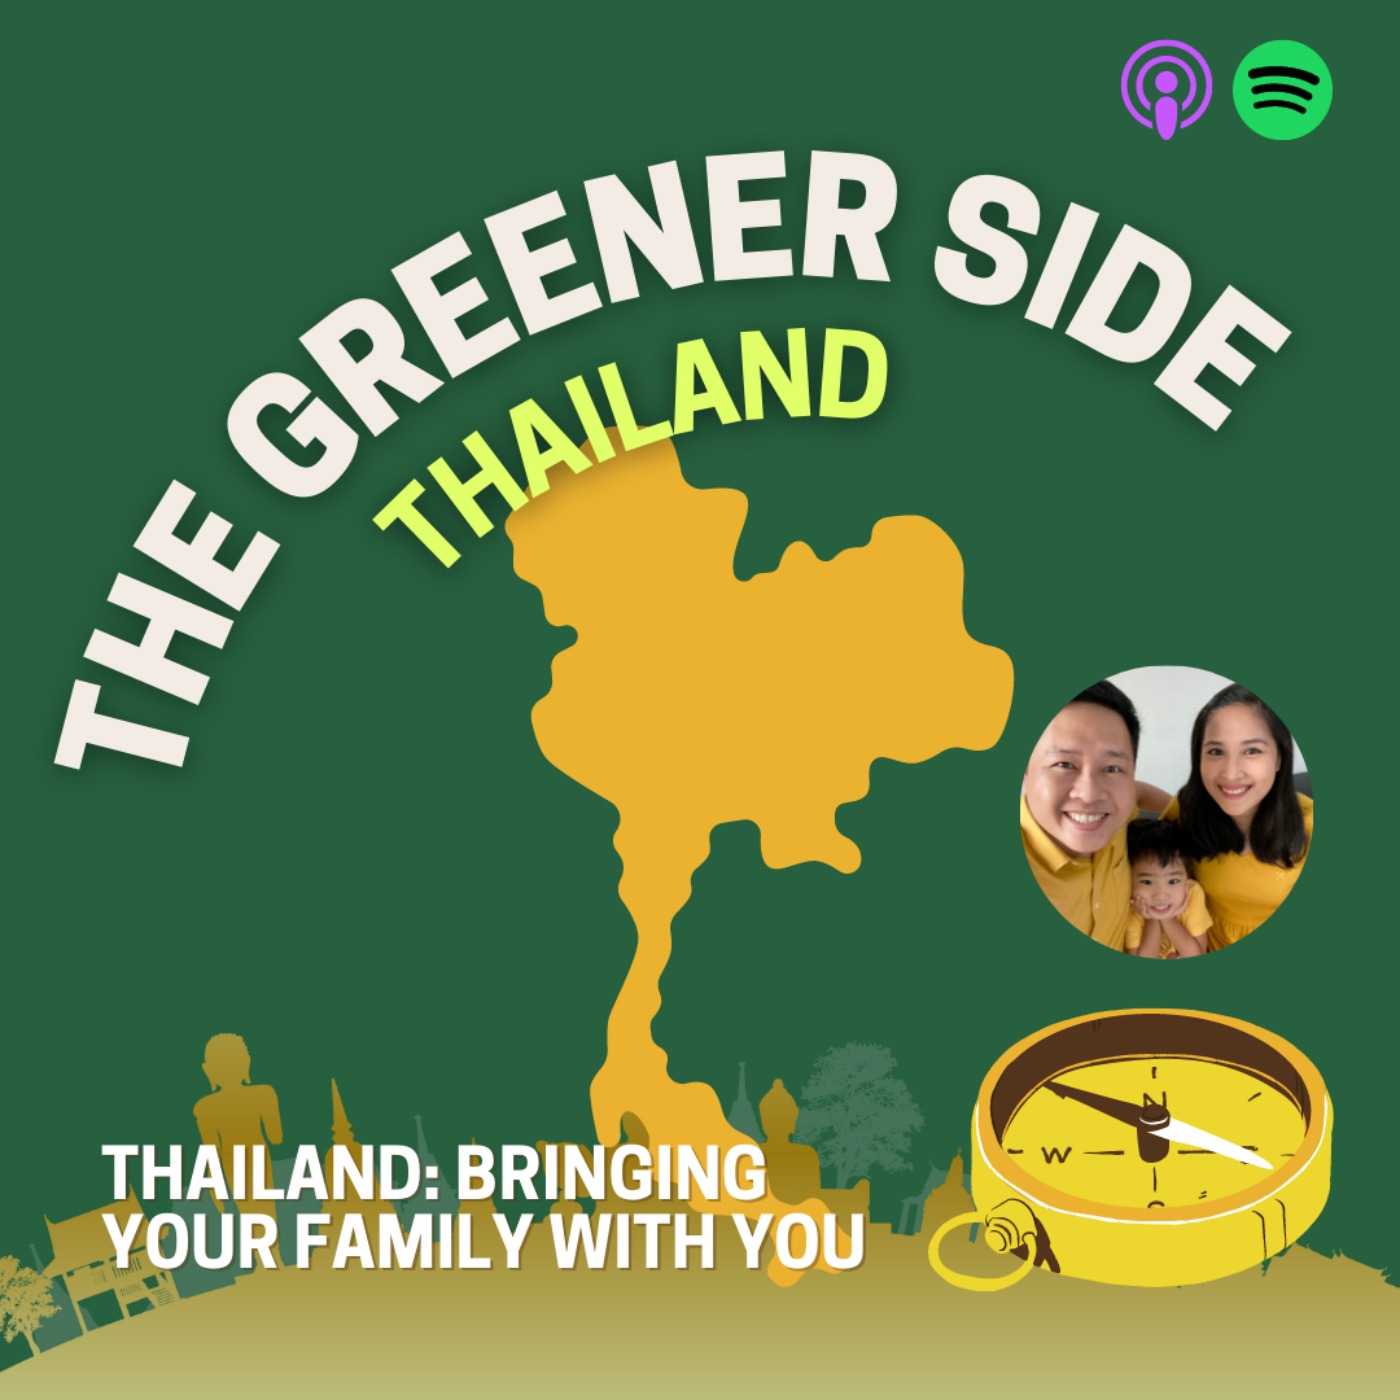 Bring your family with you to Thailand